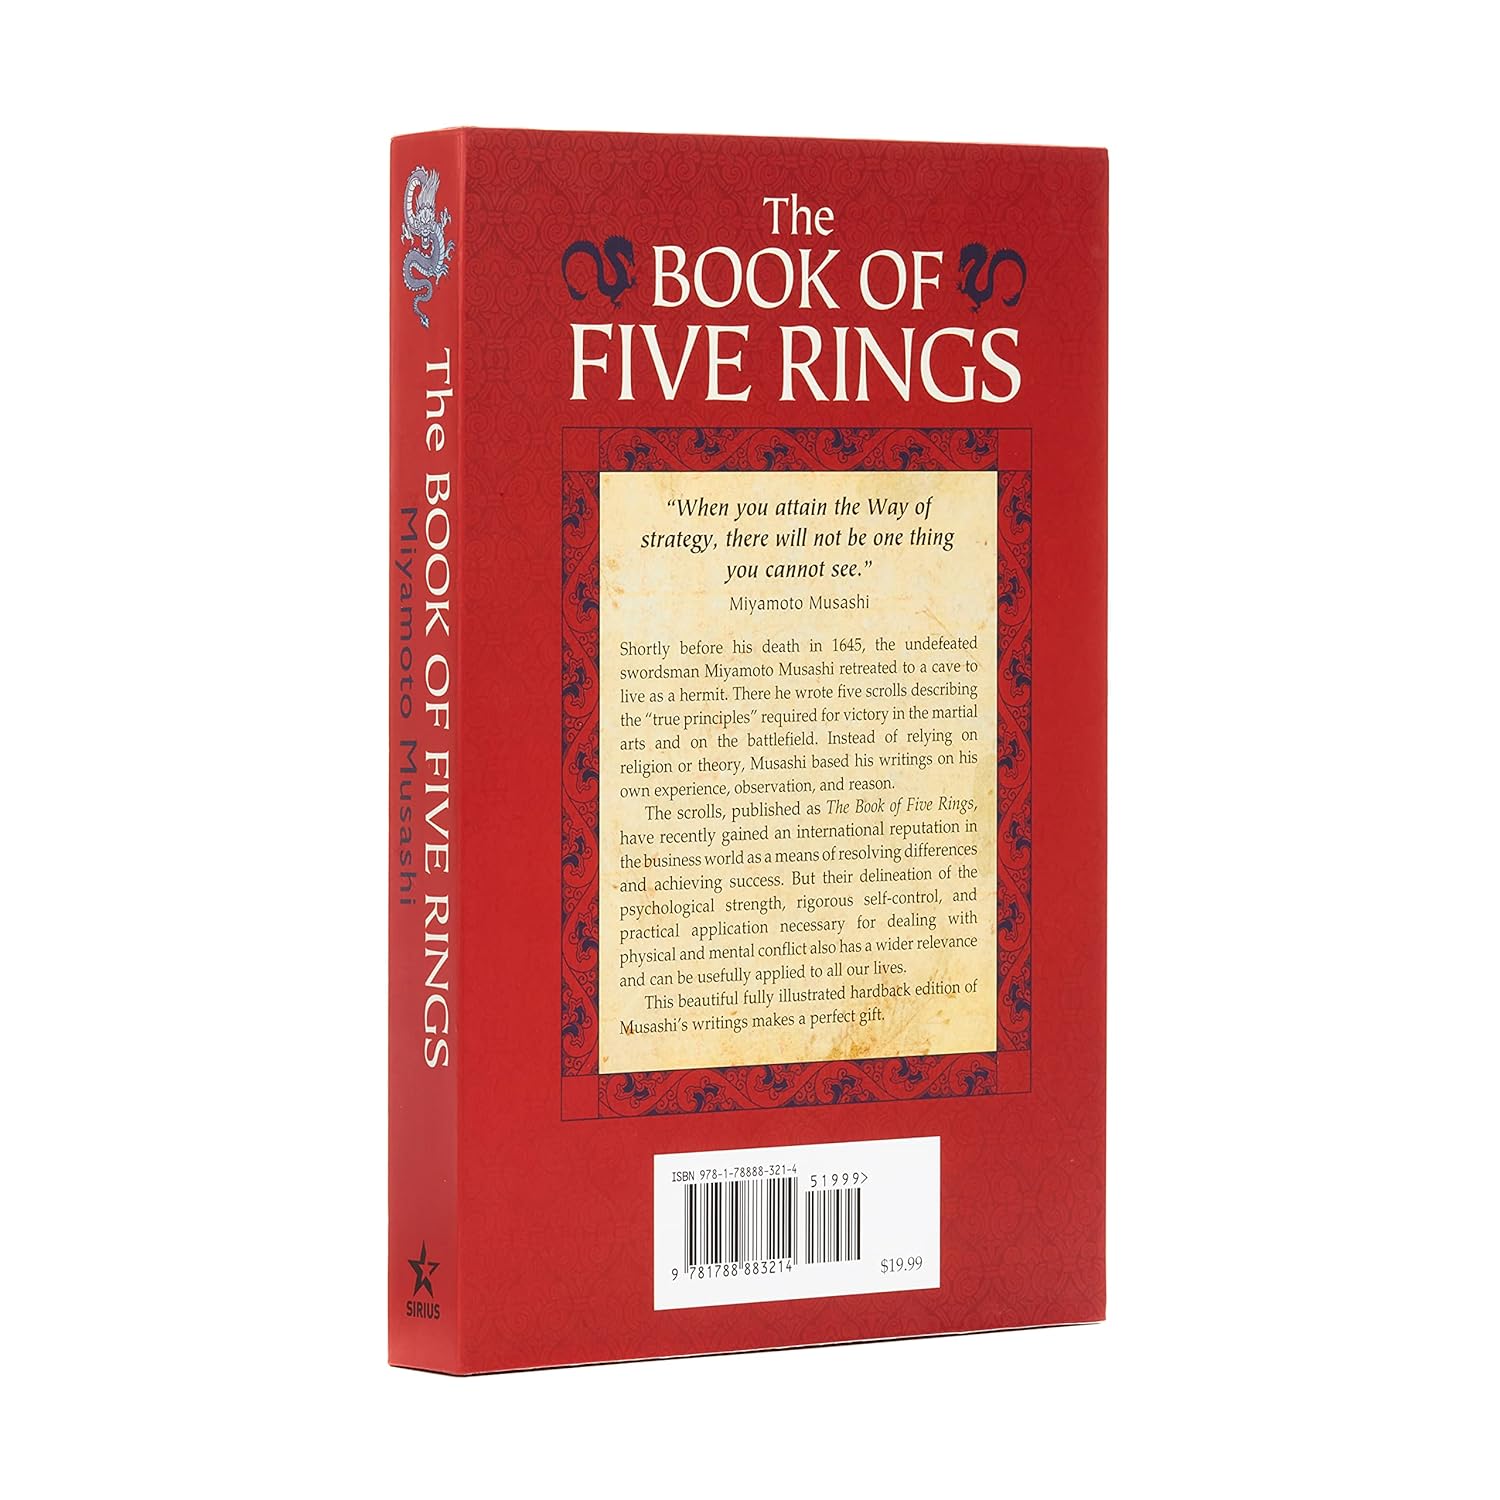 The Book of Five Rings: Deluxe Slipcase Edition by Miyamoto Musashi